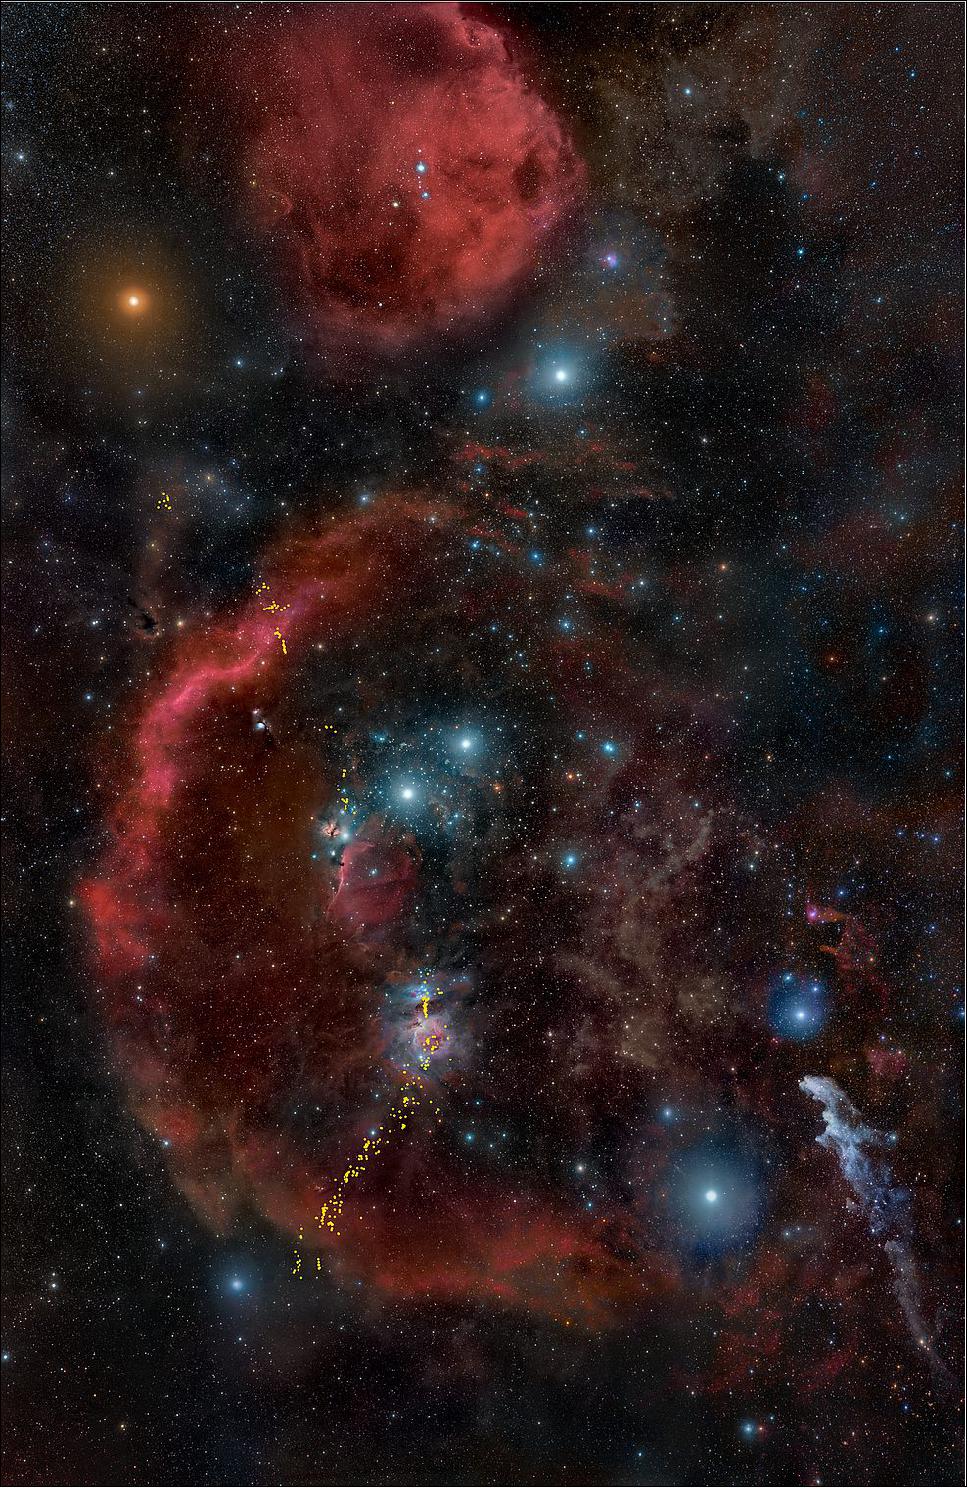 Figure 106: This ground-based image offers a wide view of the entire Orion cloud complex, the closest major star-forming region to Earth. The red material is hydrogen gas ionized and heated by ultraviolet radiation from massive stars in Orion. The stars are forming in clouds of cold hydrogen gas that are either invisible or appear as dark regions in this image. The crescent shape is called Barnard's Loop and partly wraps around the winter constellation figure of Orion the Hunter. The hunter's belt is the diagonal chain of three stars at image center. His feet are the bright stars Saiph (bottom left) and Rigel (bottom right). This landscape encompasses tens of thousands of newly forming stars bursting to life. Many are still encased in their natal cocoons of gas and dust and only seen in infrared light. The undulating line of yellow dots, beginning at lower left, is a superimposed image of 304 nascent stars taken by NASA's Hubble Space Telescope. This landscape encompasses tens of thousands of newly forming stars bursting to life. Many are still encased in their natal cocoons of gas and dust and only seen in infrared light. Researchers used NASA's Hubble and Spitzer space telescopes and the European Space Agency's Herschel Space Telescope to analyze how young stars' powerful outflows carve out cavities in the vast gas clouds. The study is the largest-ever survey of developing stars [image credits: Image courtesy of R. B. Andreo, DeepSkyColors.com; Data Overlay: NASA, ESA, STScI, N. Habel and S. T. Megeath (University of Toledo)]